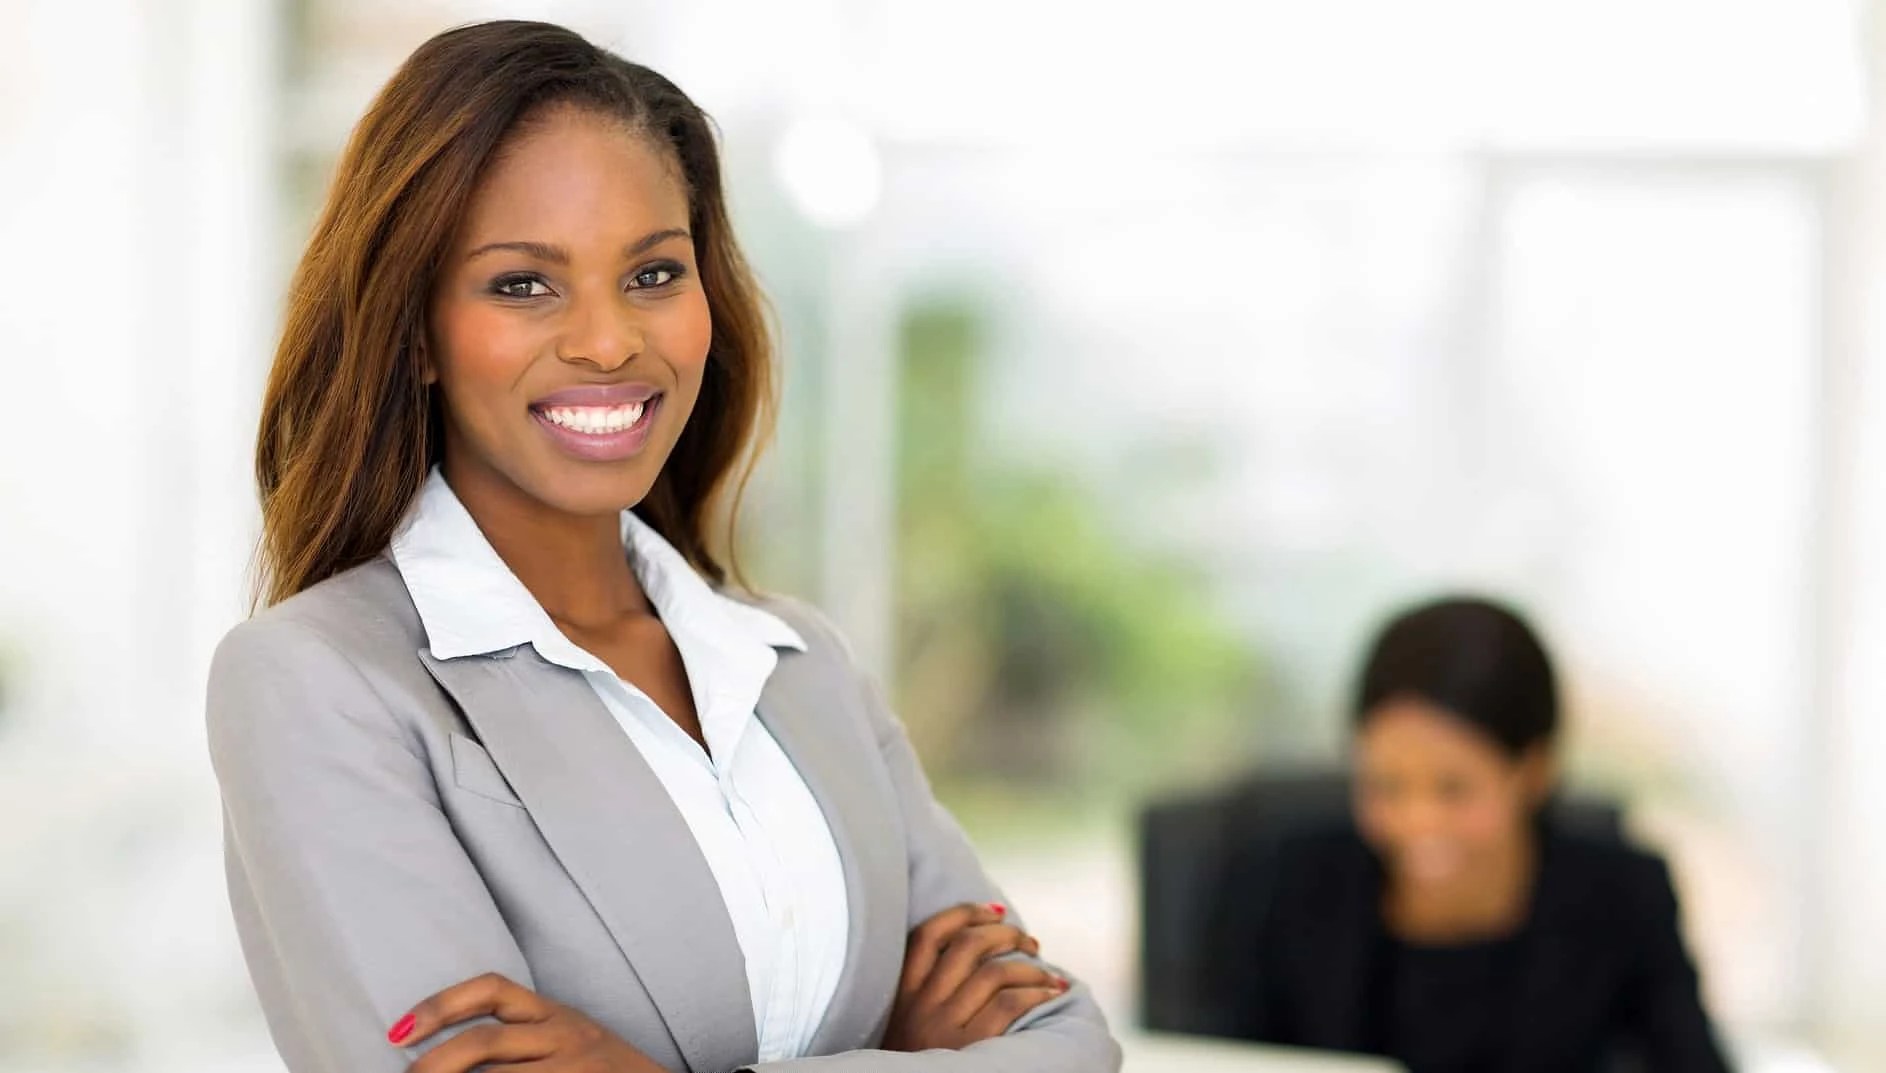 Business Woman standing confident